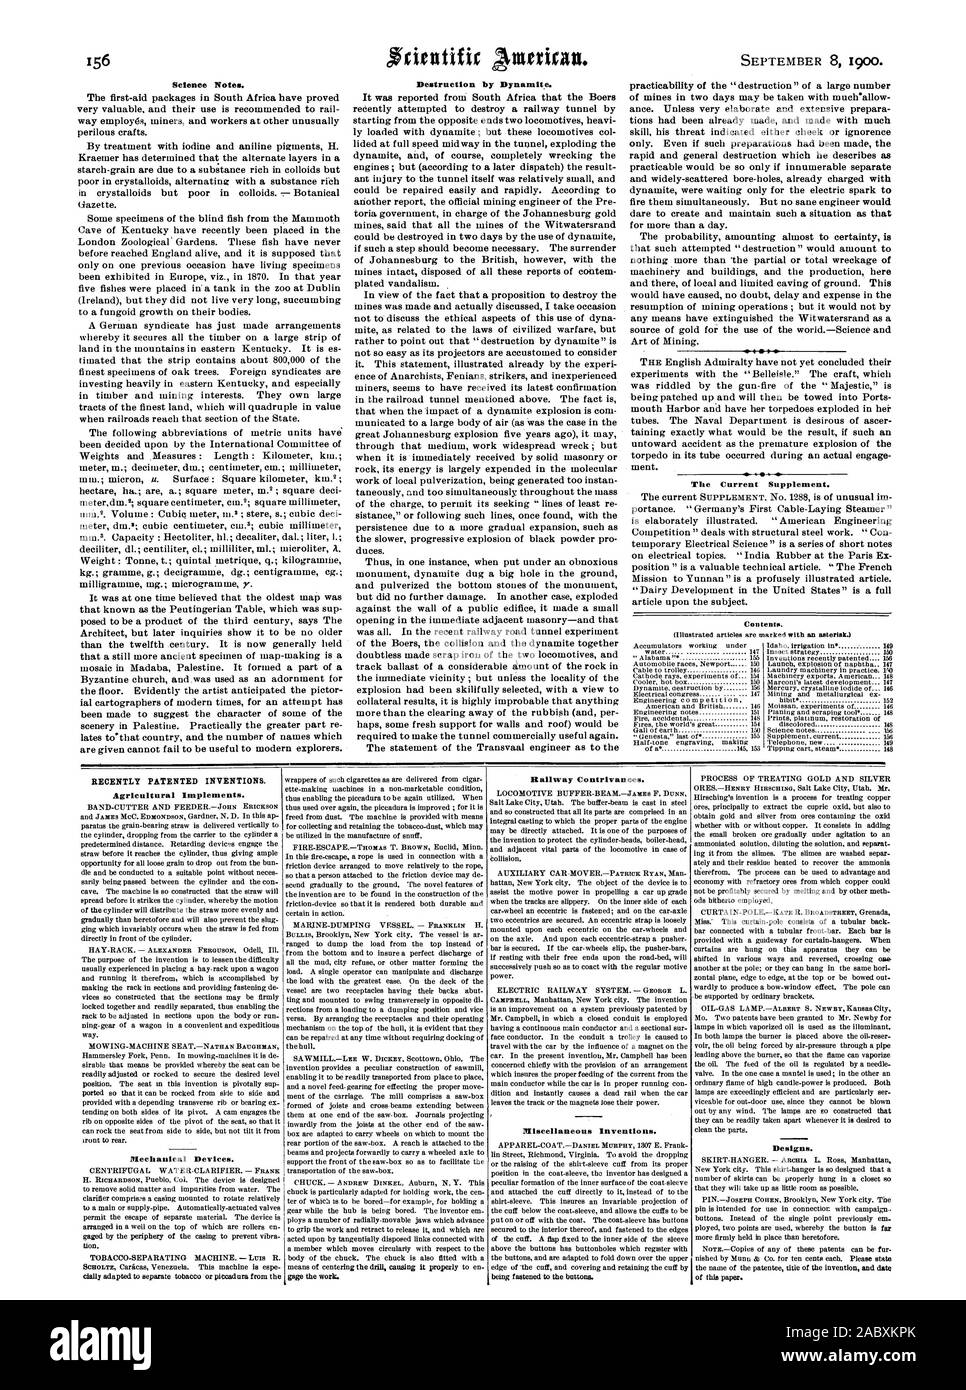 Science Notes. Destruction by Dynamite. The Current Supplement. RECENTLY PATENTED INVENTIONS. Agricultural Implements. Mechanical Devices. Hallway Contrivances. Miscellaneous Inventions. Designs., scientific american, 1900-09-11 Stock Photo